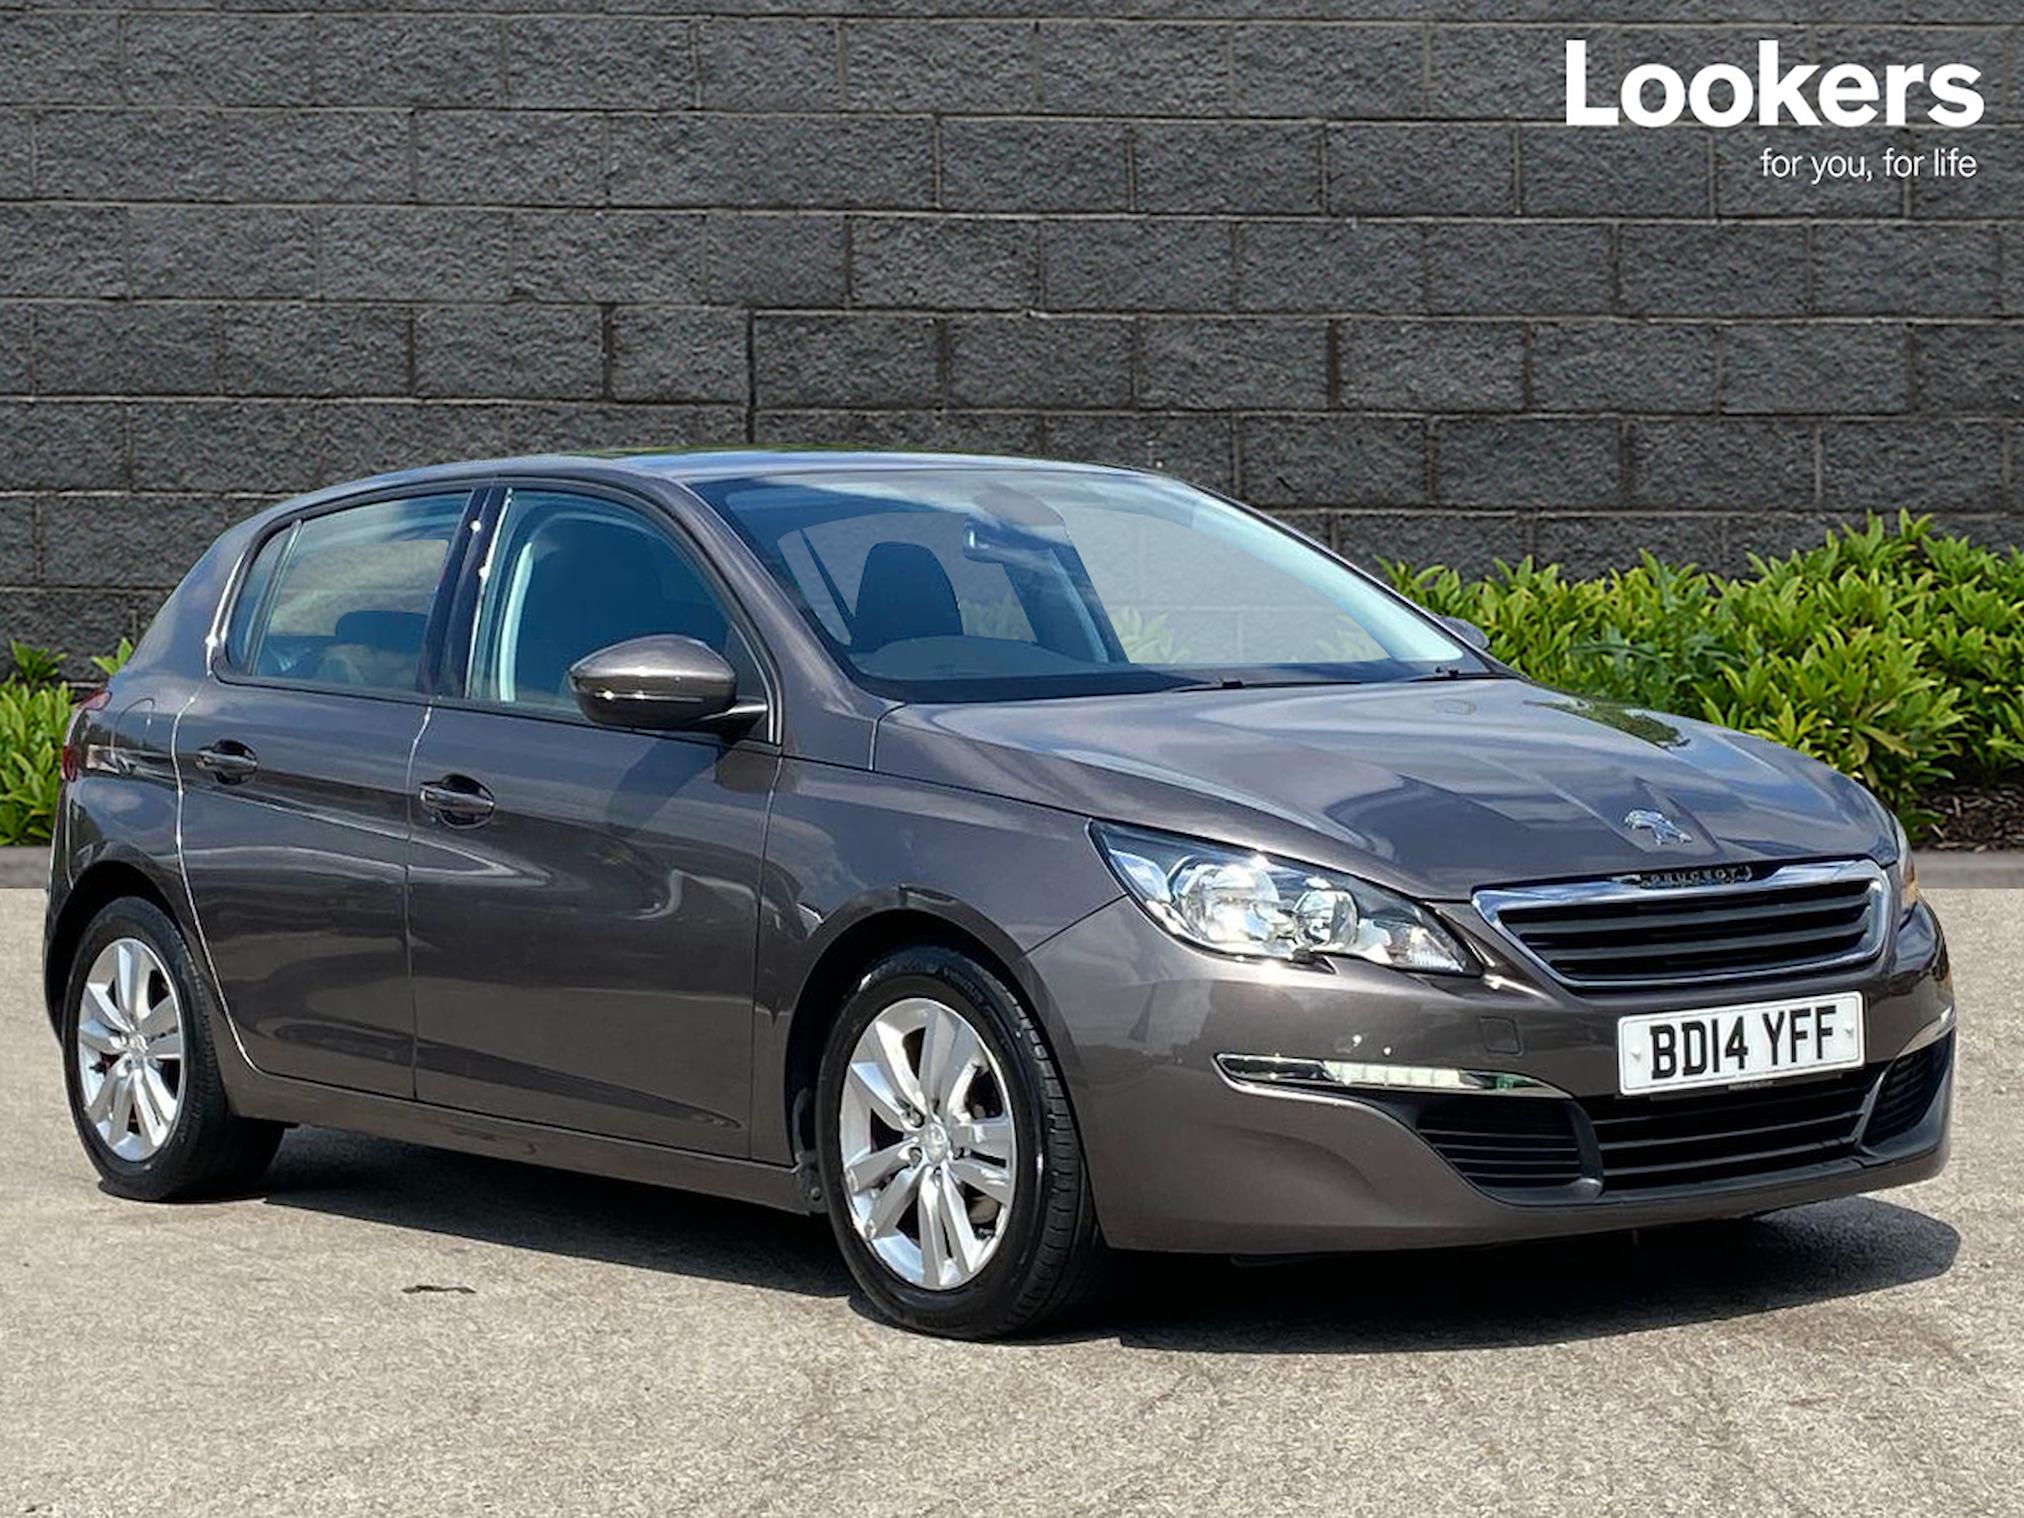 Used PEUGEOT 308 1.6 Hdi 92 Active 5Dr 2014